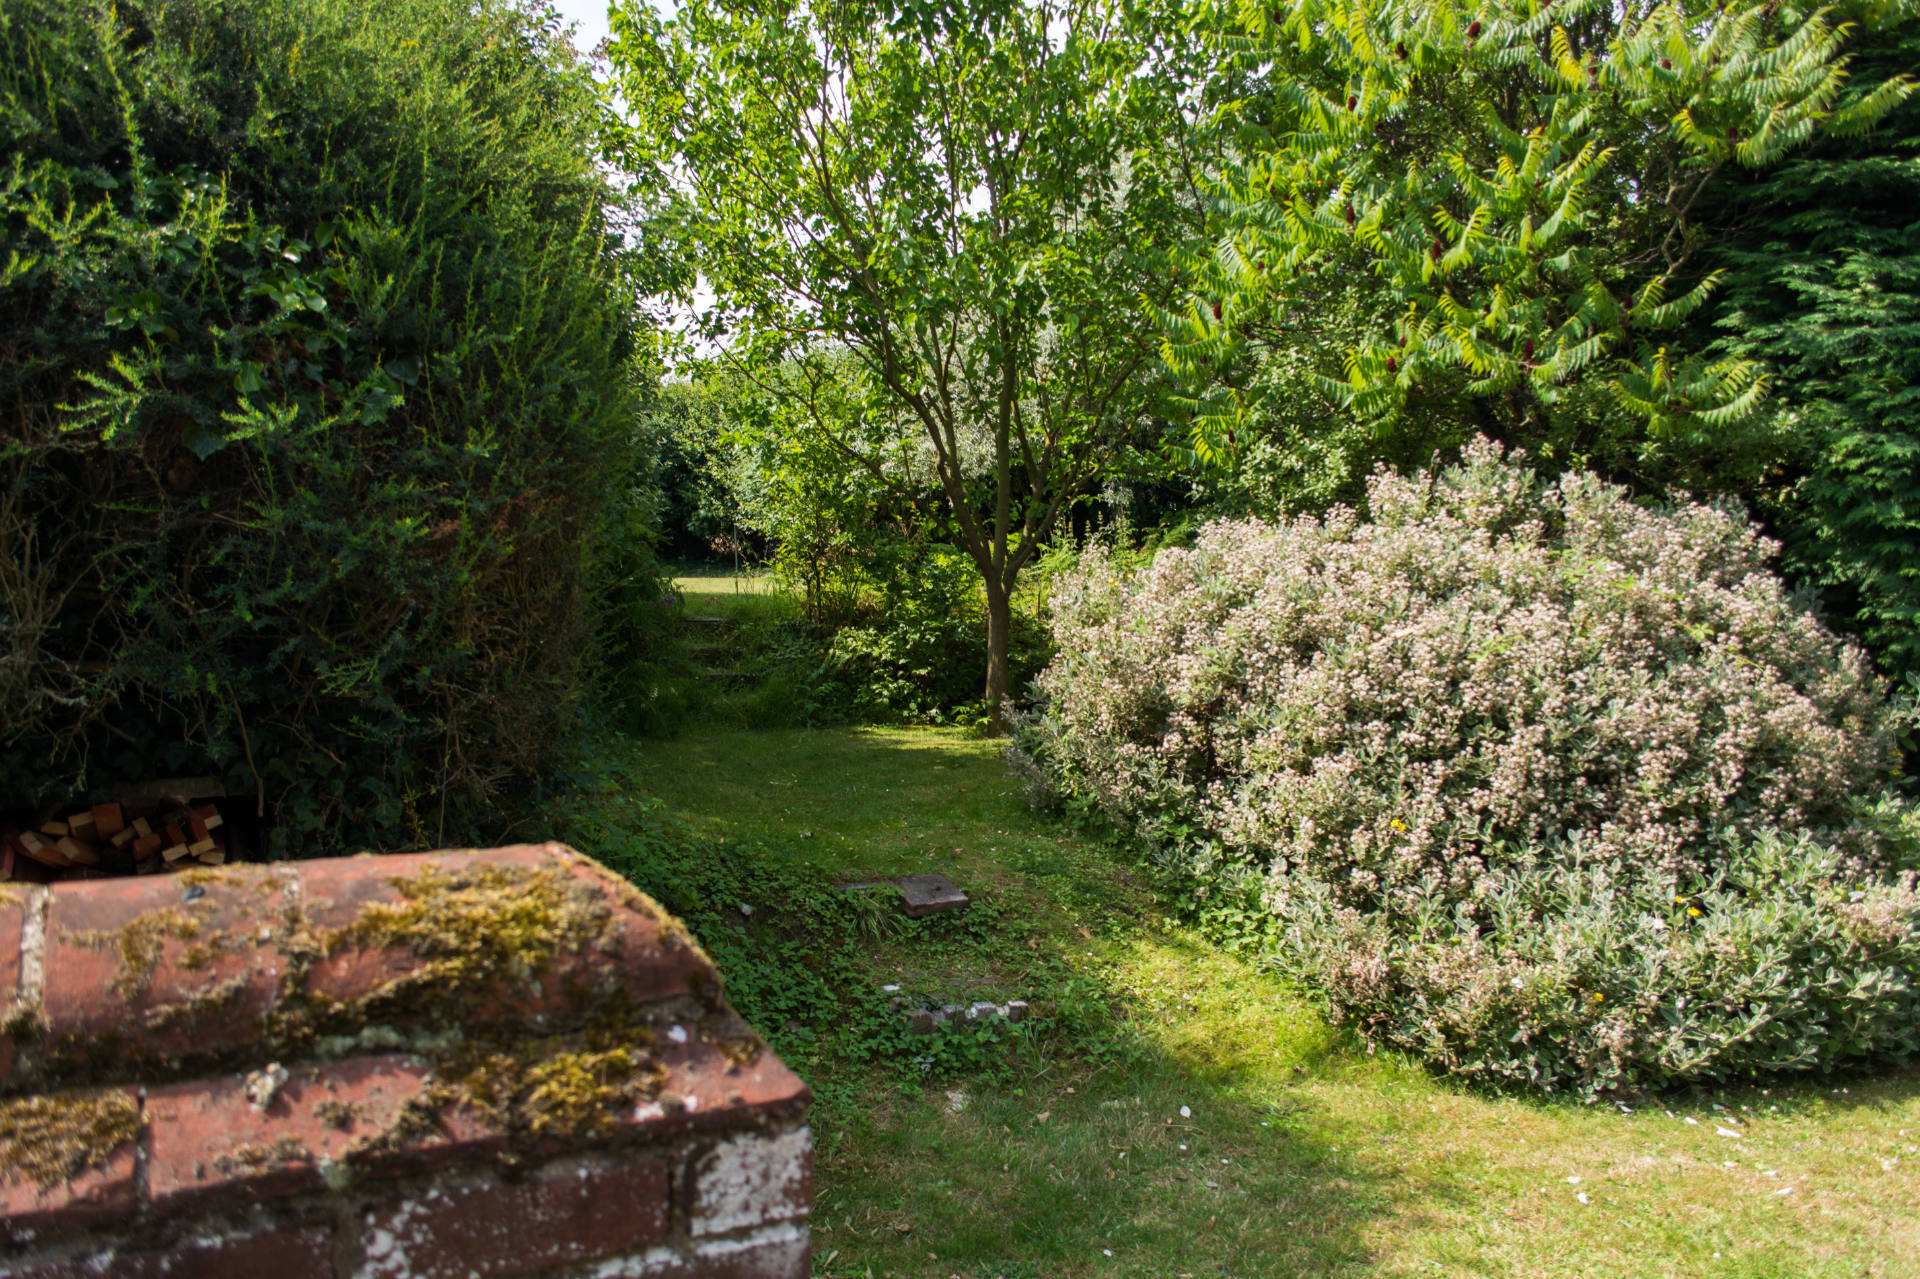 Marlpit's large outside garden area with tree and plants.